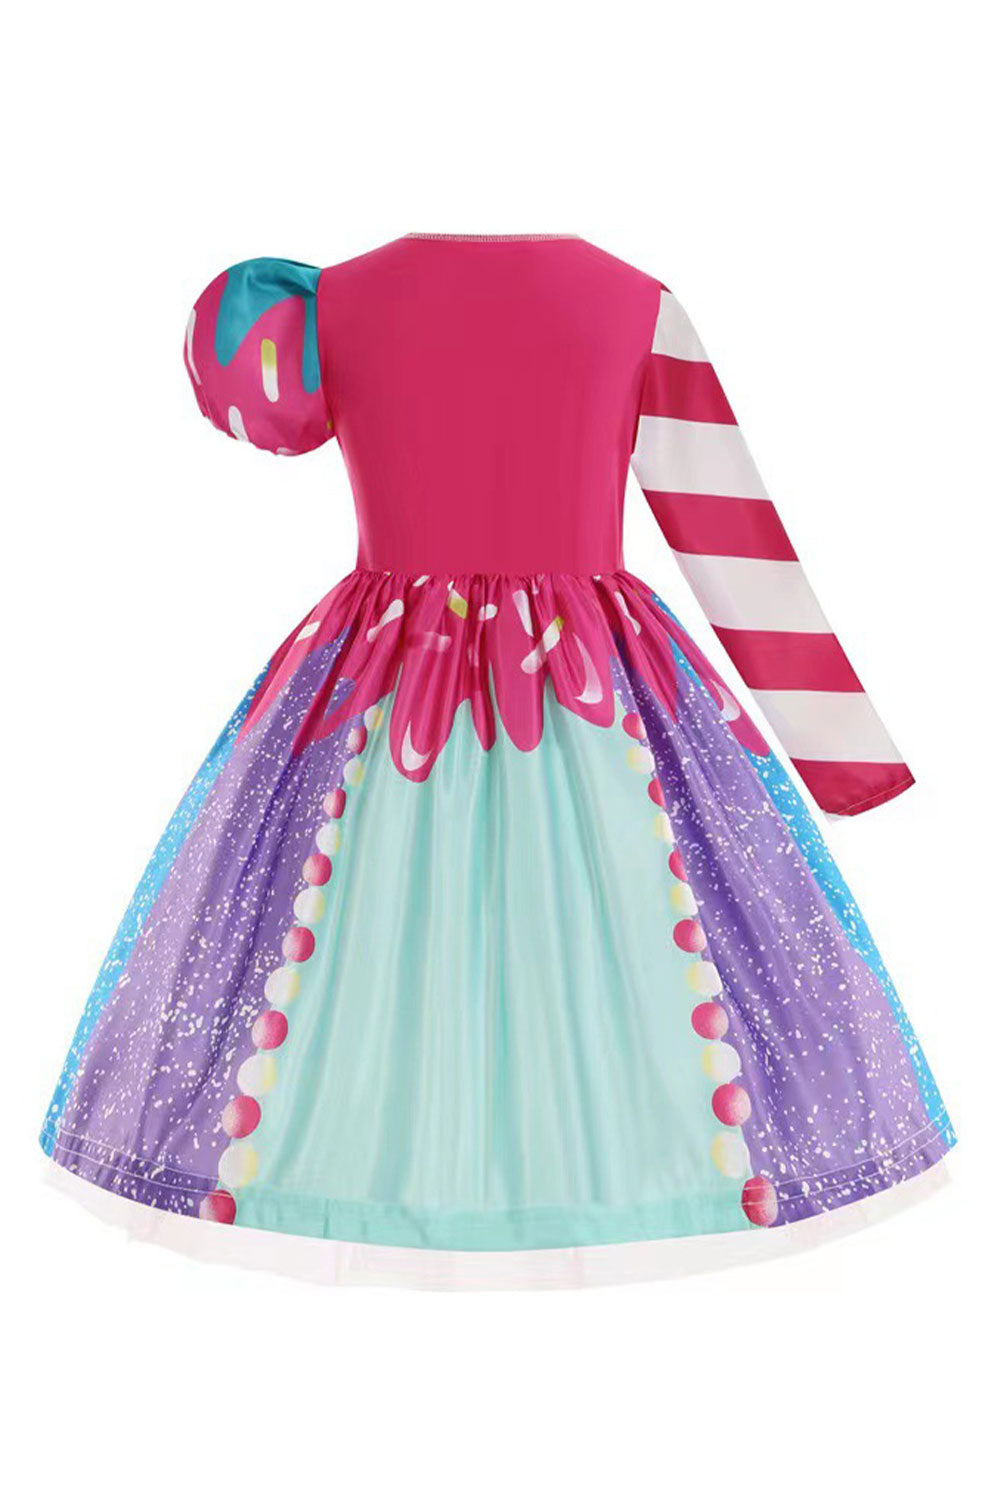 Candy Princess Dress Cosplay Costume Outfits Fantasia Halloween Carnival Party Disguise Suit